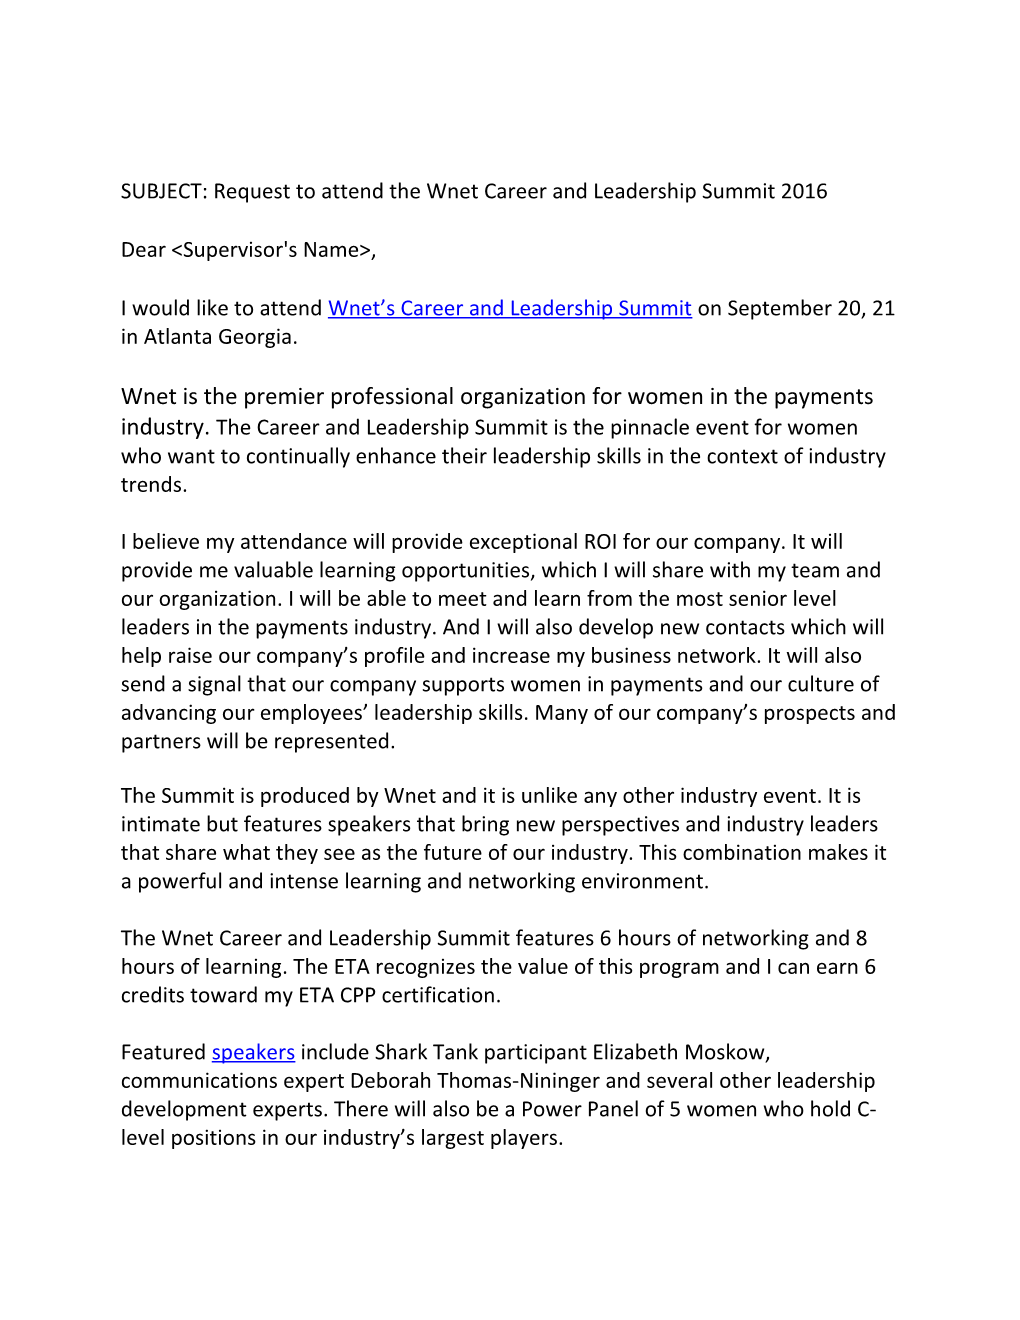 SUBJECT: Request to Attend the Wnet Career and Leadership Summit 2016